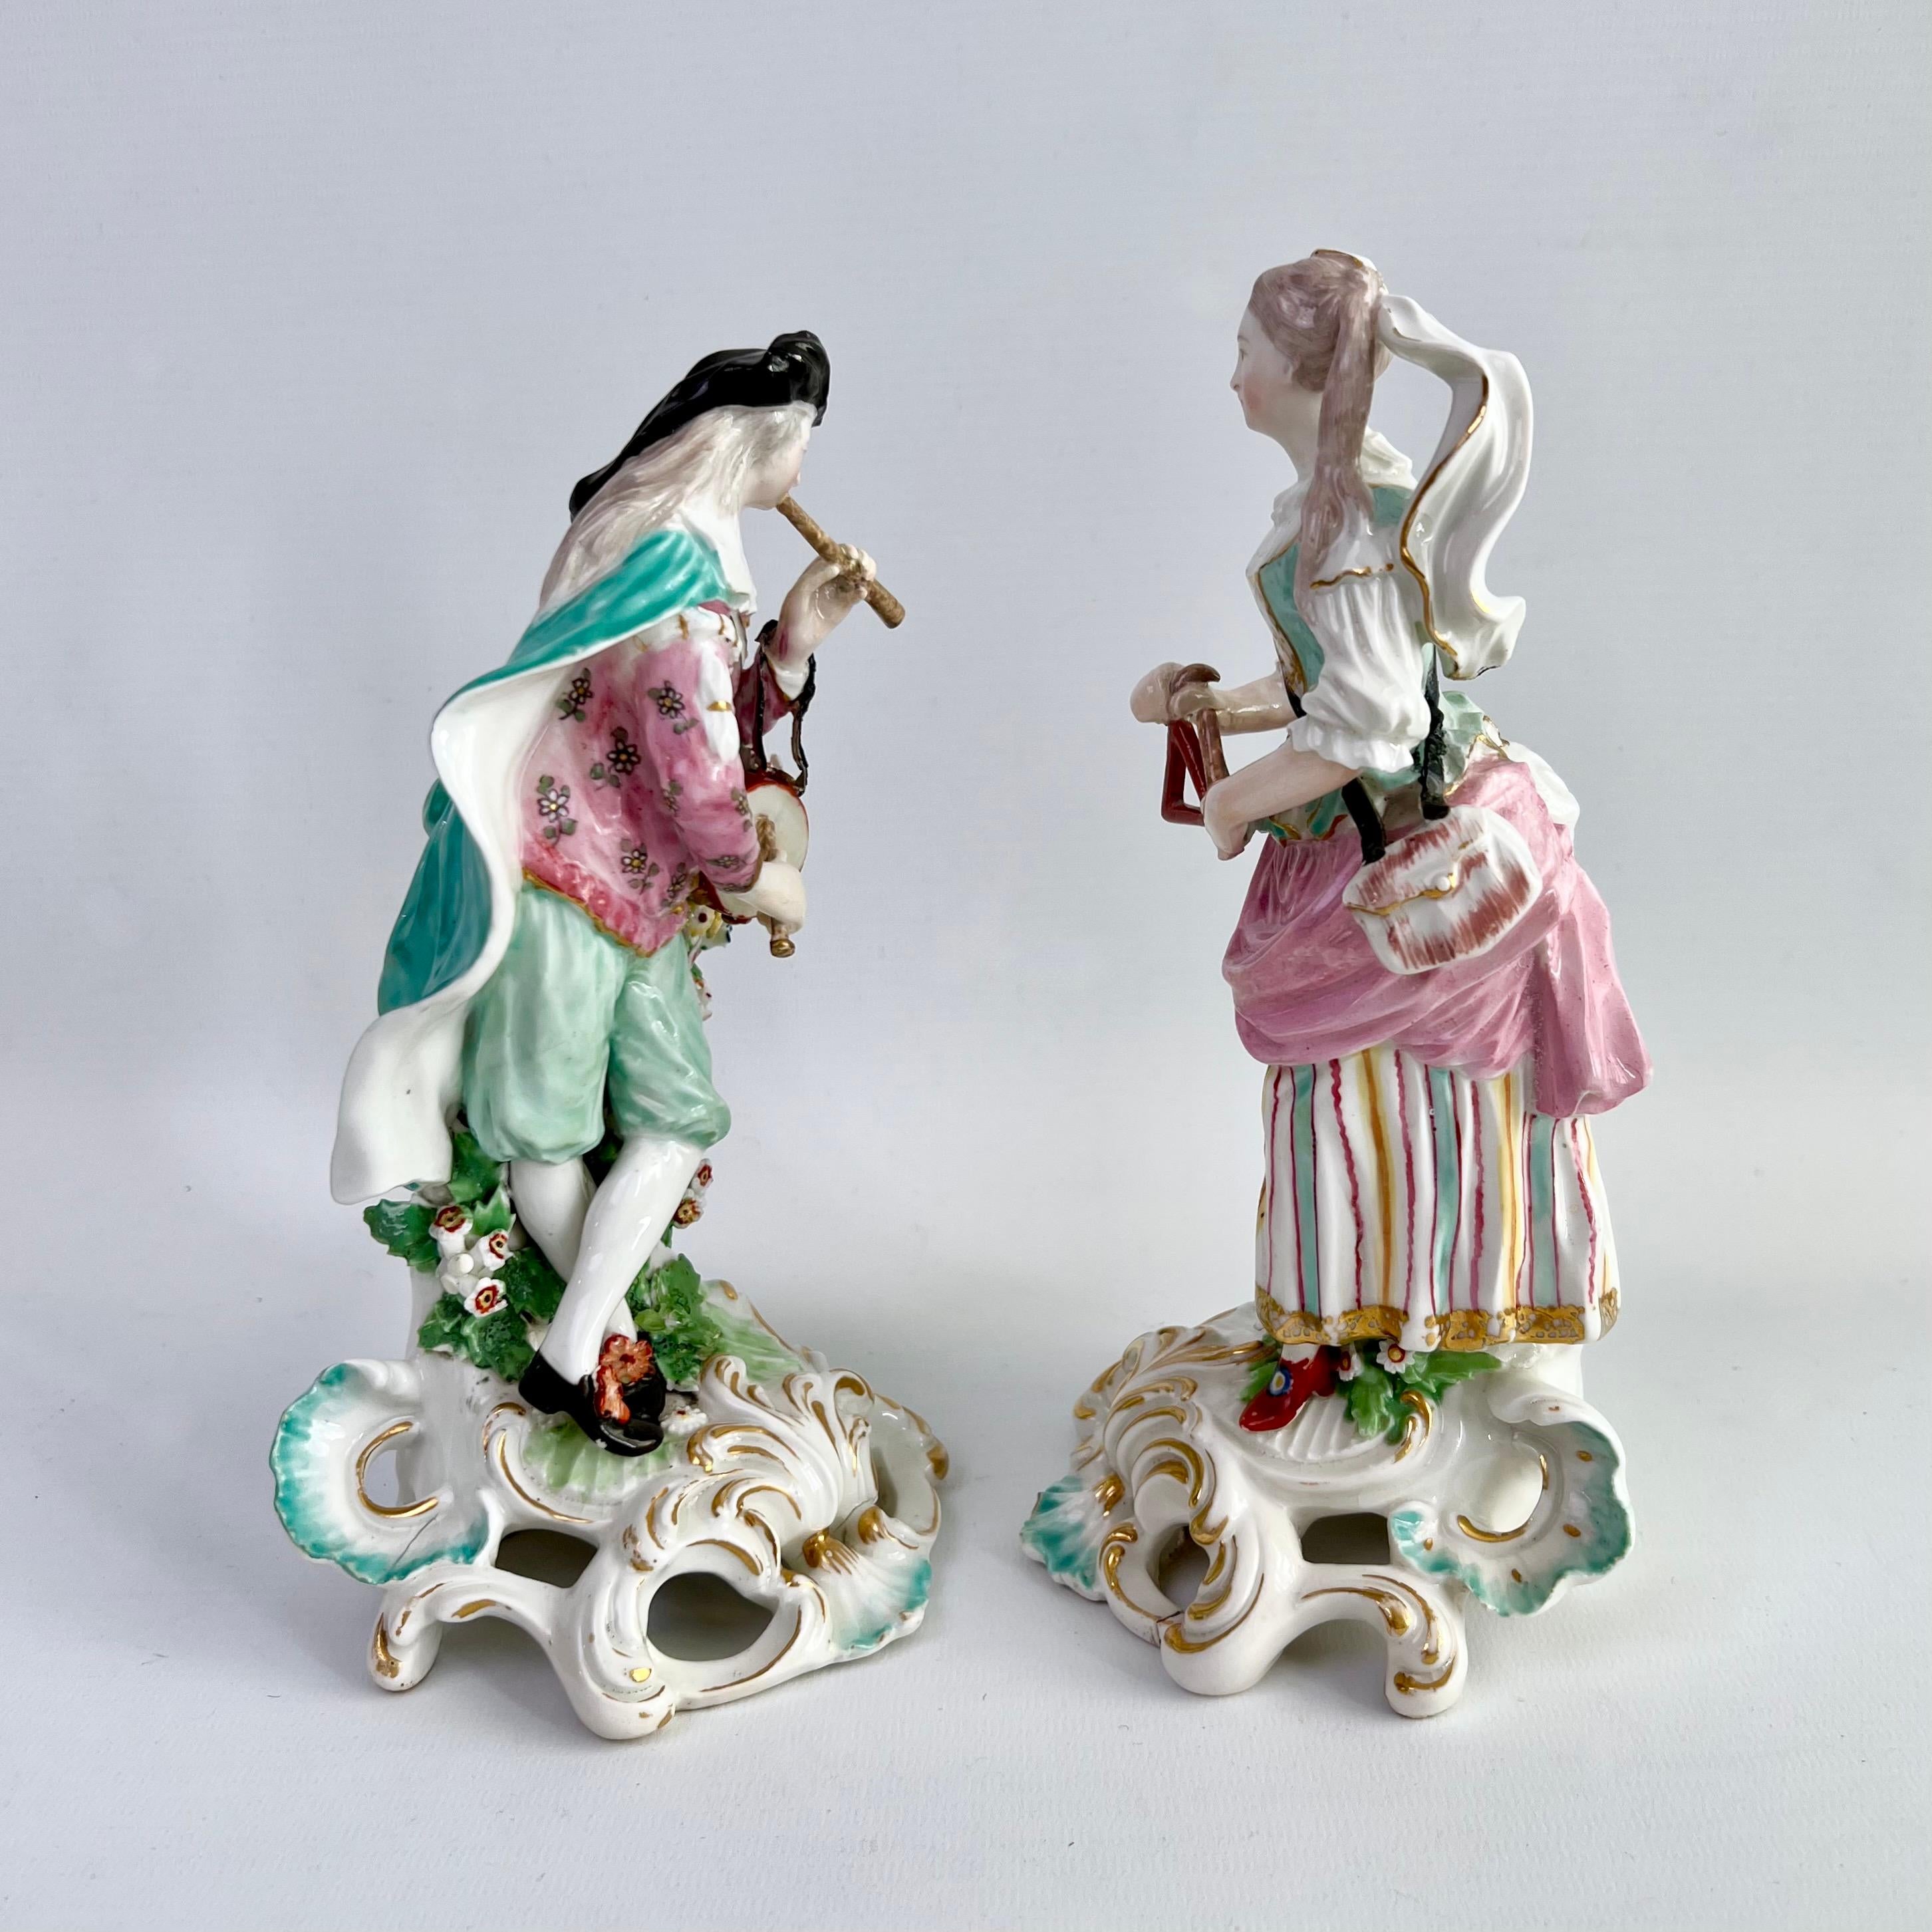 This is a beautiful pair of porcelain figures made by Derby around 1765. The pair was called the 